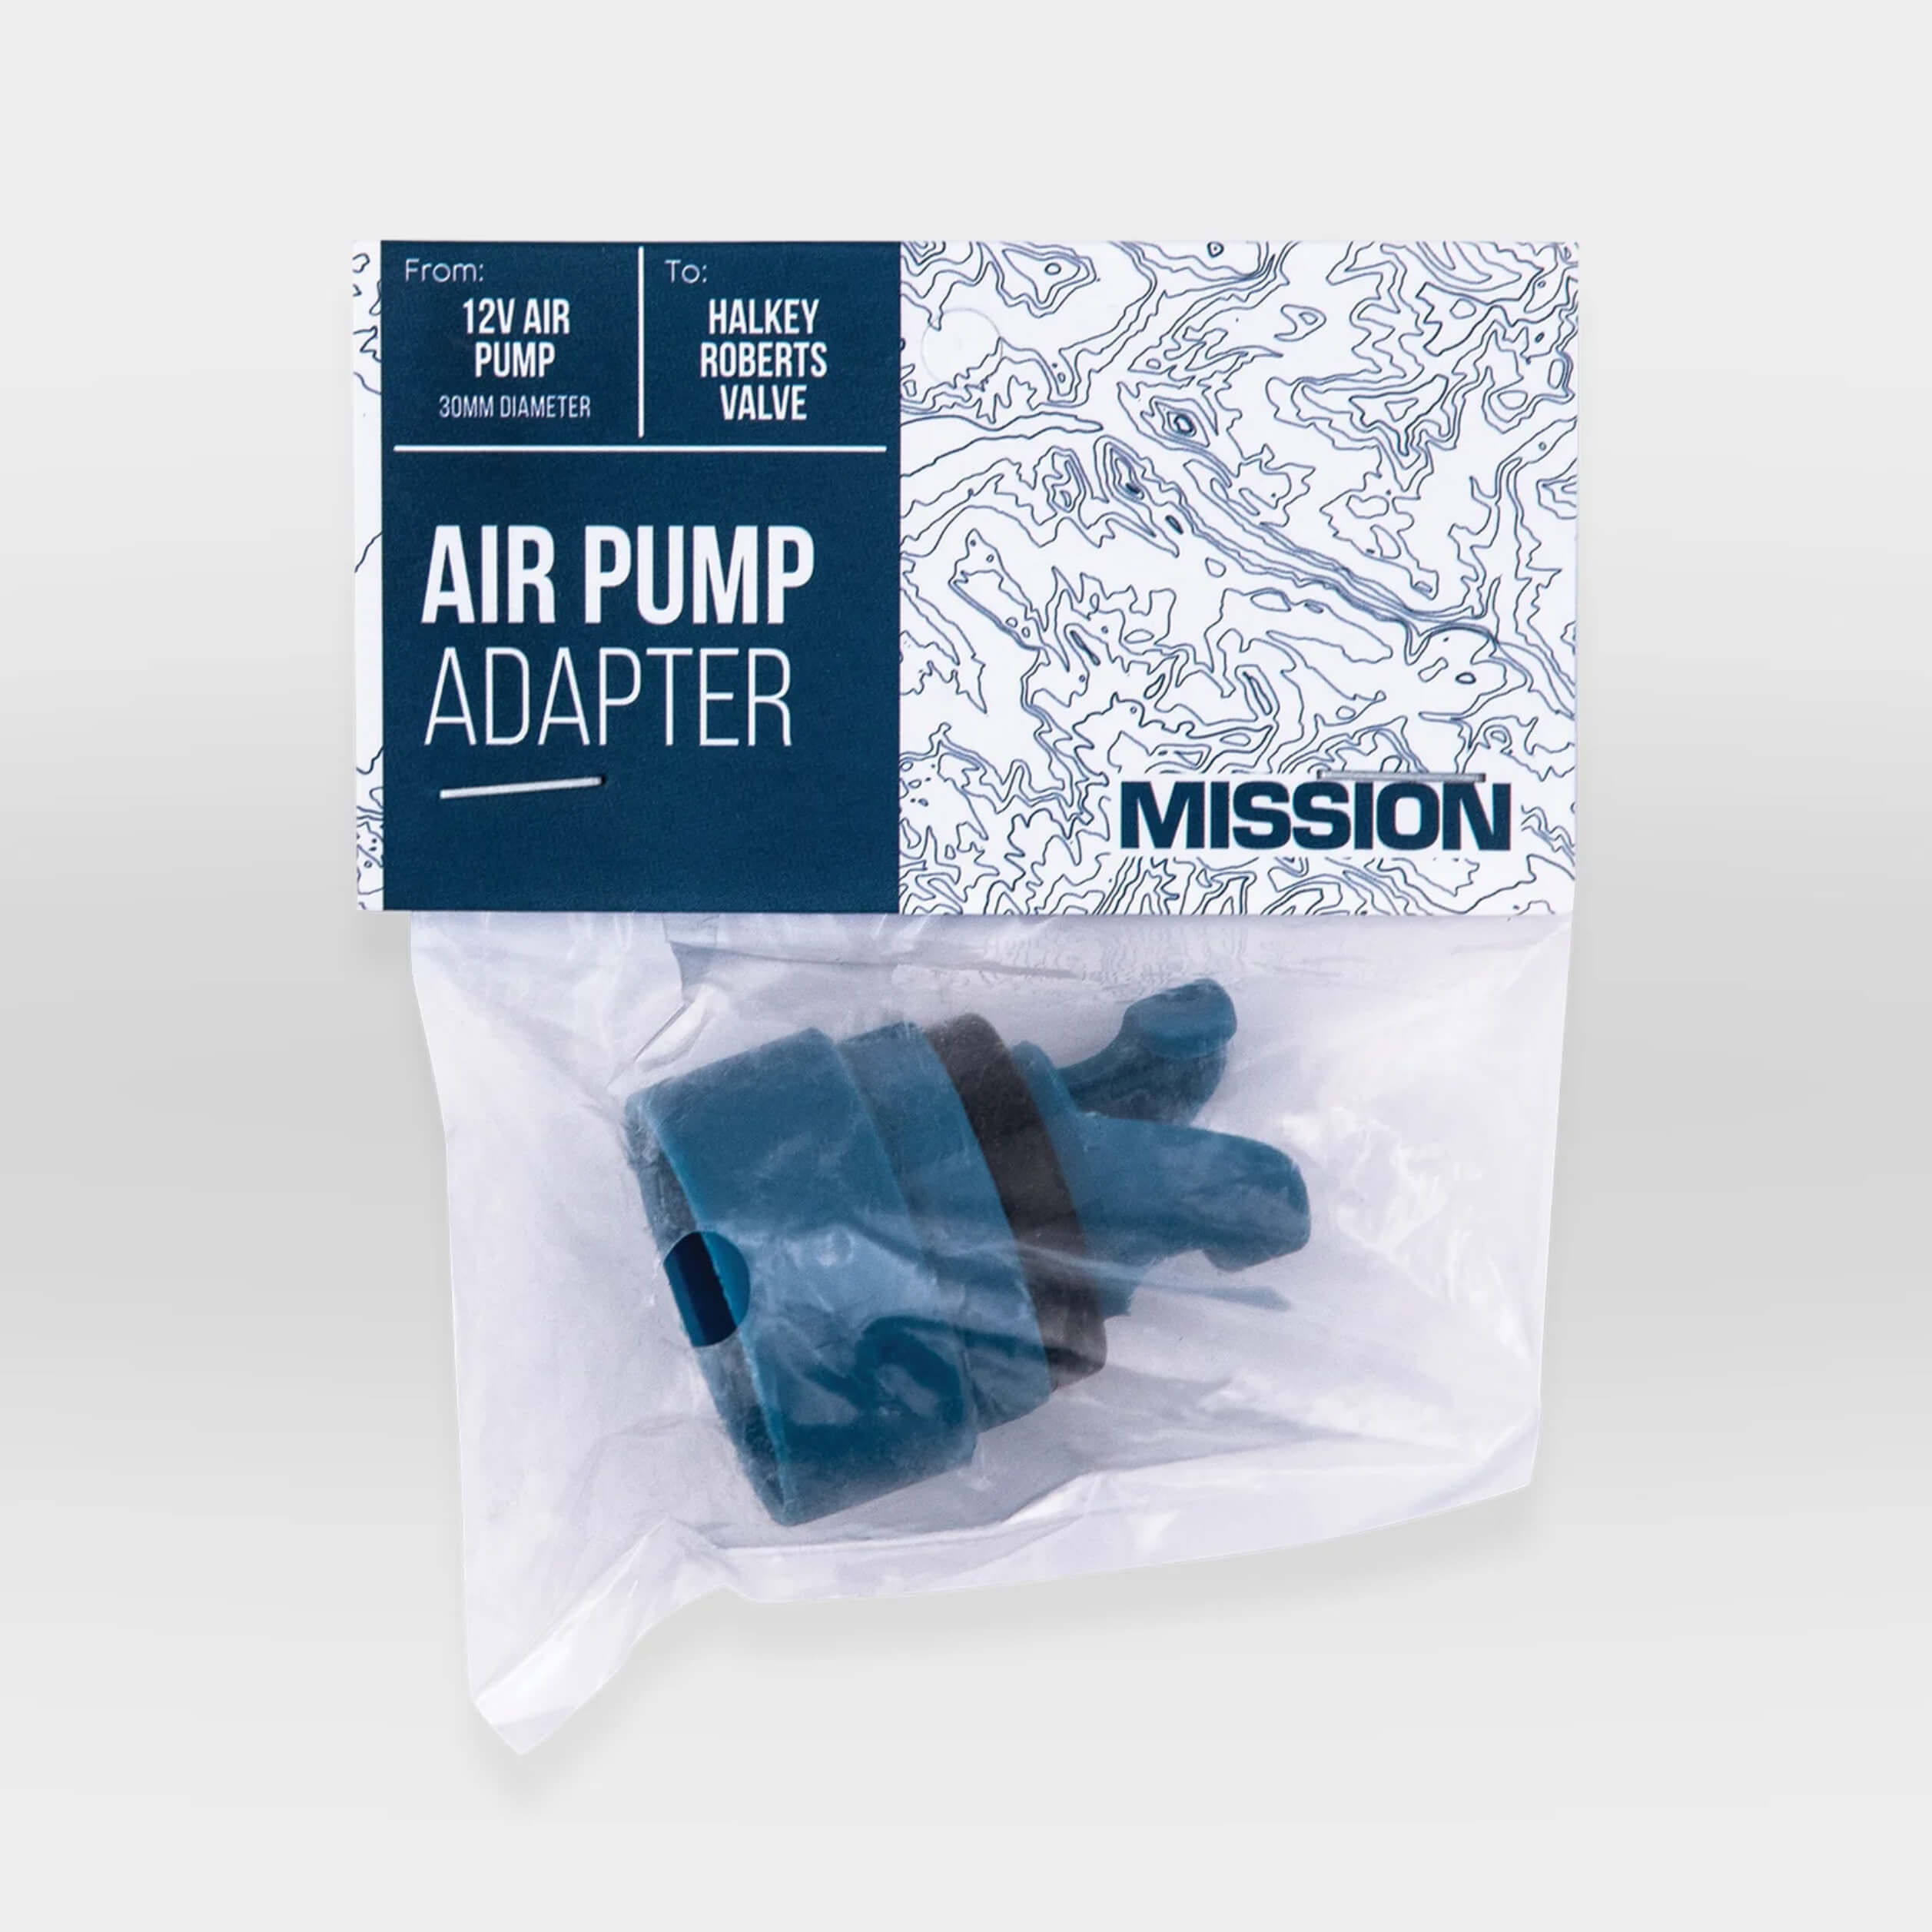 Low Pressure HR Adapter from MISSION